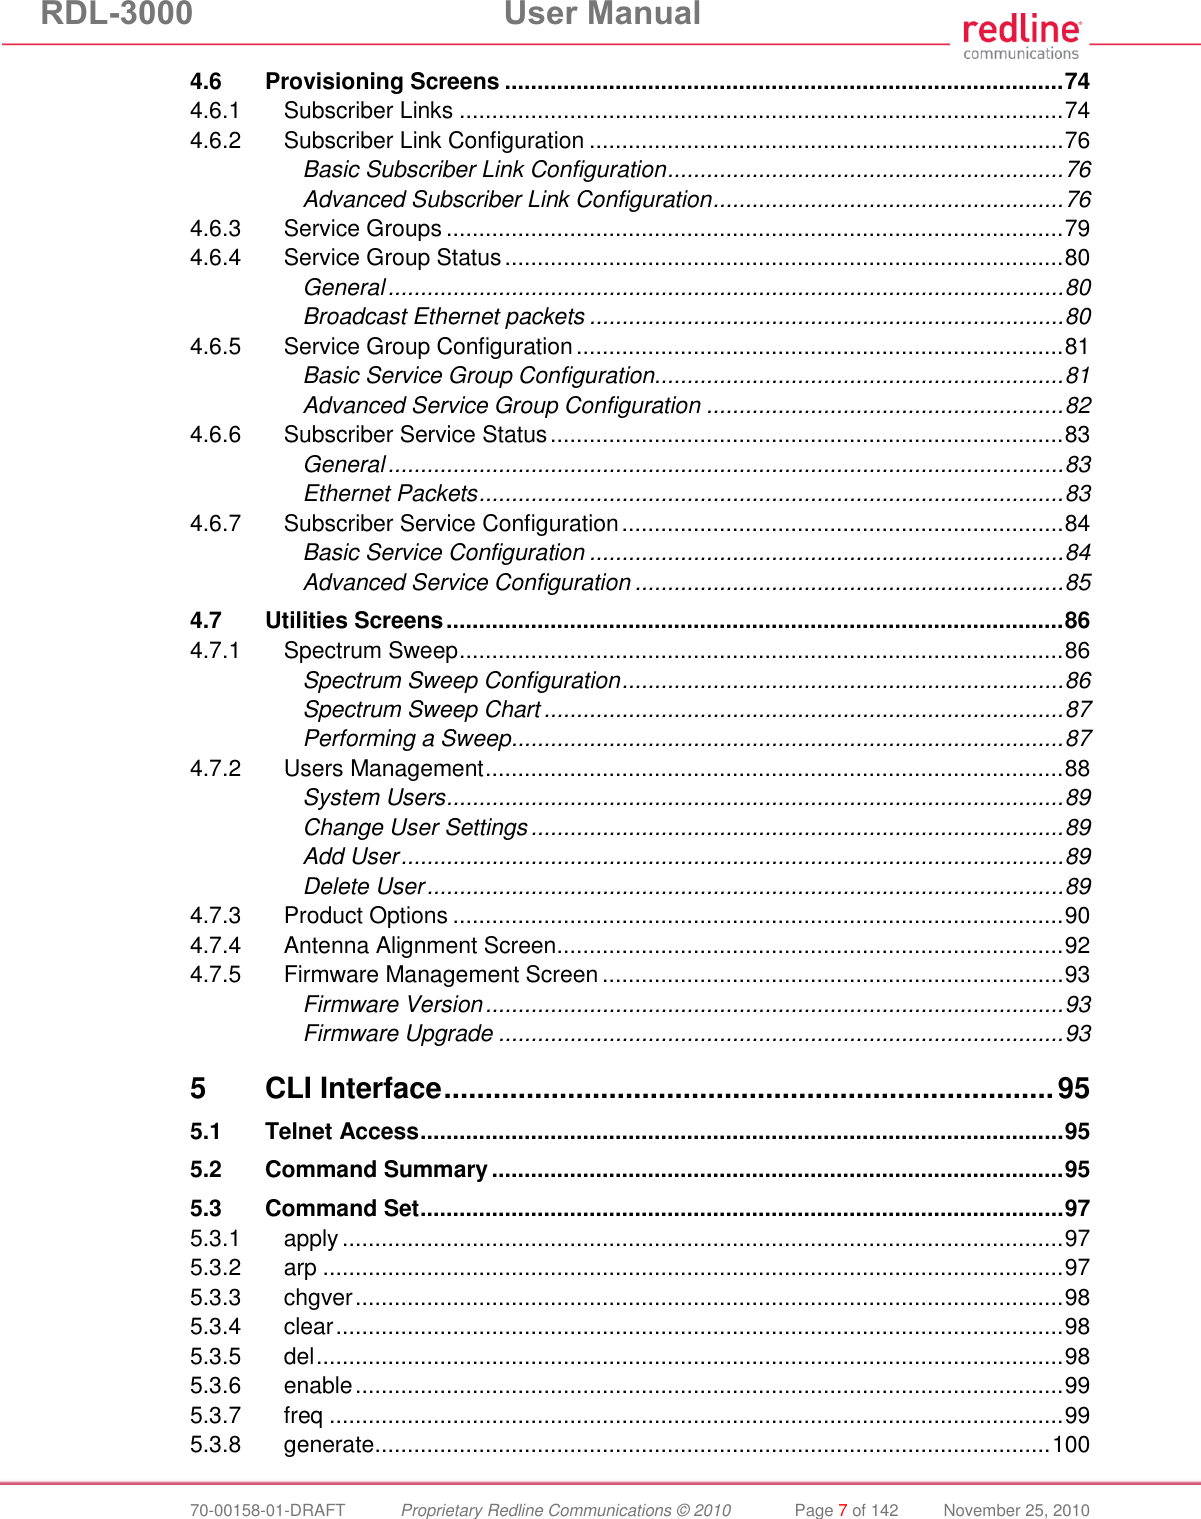 RDL-3000  User Manual  70-00158-01-DRAFT  Proprietary Redline Communications © 2010  Page 7 of 142  November 25, 2010 4.6 Provisioning Screens ...................................................................................... 74 4.6.1 Subscriber Links ............................................................................................. 74 4.6.2 Subscriber Link Configuration ......................................................................... 76 Basic Subscriber Link Configuration ............................................................. 76 Advanced Subscriber Link Configuration ...................................................... 76 4.6.3 Service Groups ............................................................................................... 79 4.6.4 Service Group Status ...................................................................................... 80 General ........................................................................................................ 80 Broadcast Ethernet packets ......................................................................... 80 4.6.5 Service Group Configuration ........................................................................... 81 Basic Service Group Configuration............................................................... 81 Advanced Service Group Configuration ....................................................... 82 4.6.6 Subscriber Service Status ............................................................................... 83 General ........................................................................................................ 83 Ethernet Packets .......................................................................................... 83 4.6.7 Subscriber Service Configuration .................................................................... 84 Basic Service Configuration ......................................................................... 84 Advanced Service Configuration .................................................................. 85 4.7 Utilities Screens ............................................................................................... 86 4.7.1 Spectrum Sweep ............................................................................................. 86 Spectrum Sweep Configuration .................................................................... 86 Spectrum Sweep Chart ................................................................................ 87 Performing a Sweep ..................................................................................... 87 4.7.2 Users Management ......................................................................................... 88 System Users ............................................................................................... 89 Change User Settings .................................................................................. 89 Add User ...................................................................................................... 89 Delete User .................................................................................................. 89 4.7.3 Product Options .............................................................................................. 90 4.7.4 Antenna Alignment Screen.............................................................................. 92 4.7.5 Firmware Management Screen ....................................................................... 93 Firmware Version ......................................................................................... 93 Firmware Upgrade ....................................................................................... 93 5 CLI Interface .......................................................................... 95 5.1 Telnet Access ................................................................................................... 95 5.2 Command Summary ........................................................................................ 95 5.3 Command Set ................................................................................................... 97 5.3.1 apply ............................................................................................................... 97 5.3.2 arp .................................................................................................................. 97 5.3.3 chgver ............................................................................................................. 98 5.3.4 clear ................................................................................................................ 98 5.3.5 del ................................................................................................................... 98 5.3.6 enable ............................................................................................................. 99 5.3.7 freq ................................................................................................................. 99 5.3.8 generate ........................................................................................................ 100 